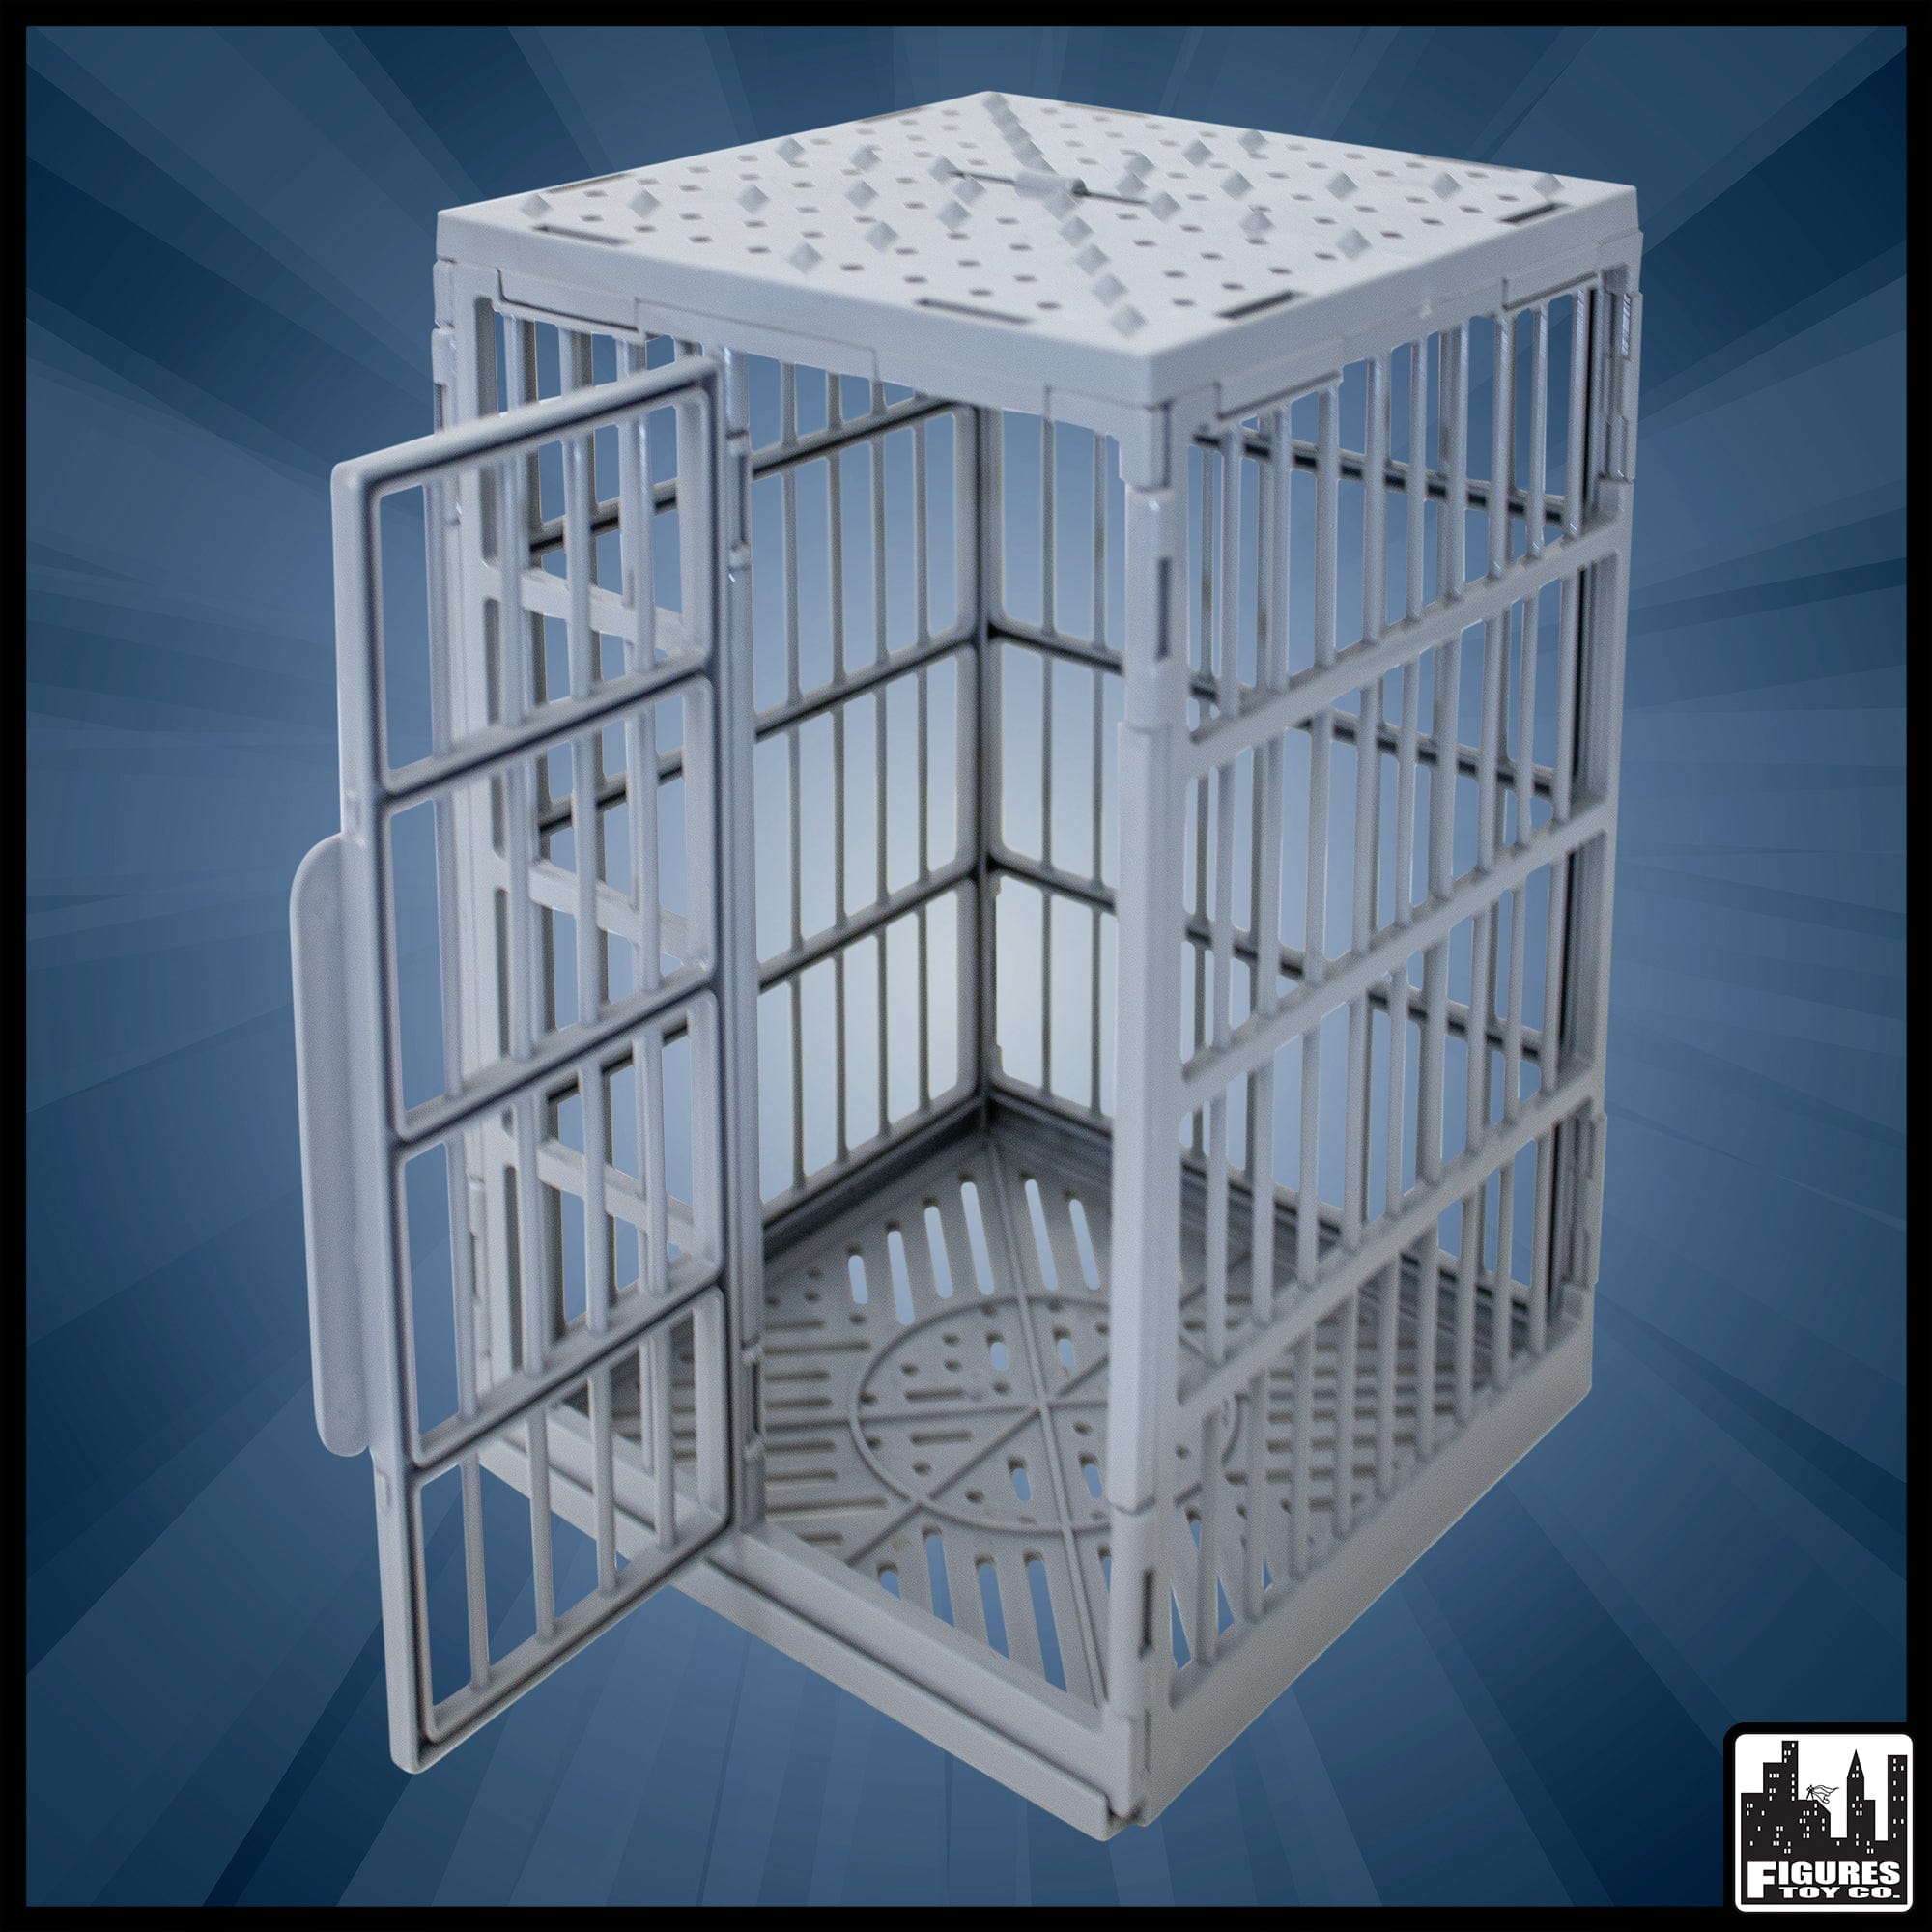 Miniature Toy Jail Prison Cell for 6-8 Inch Action Figures